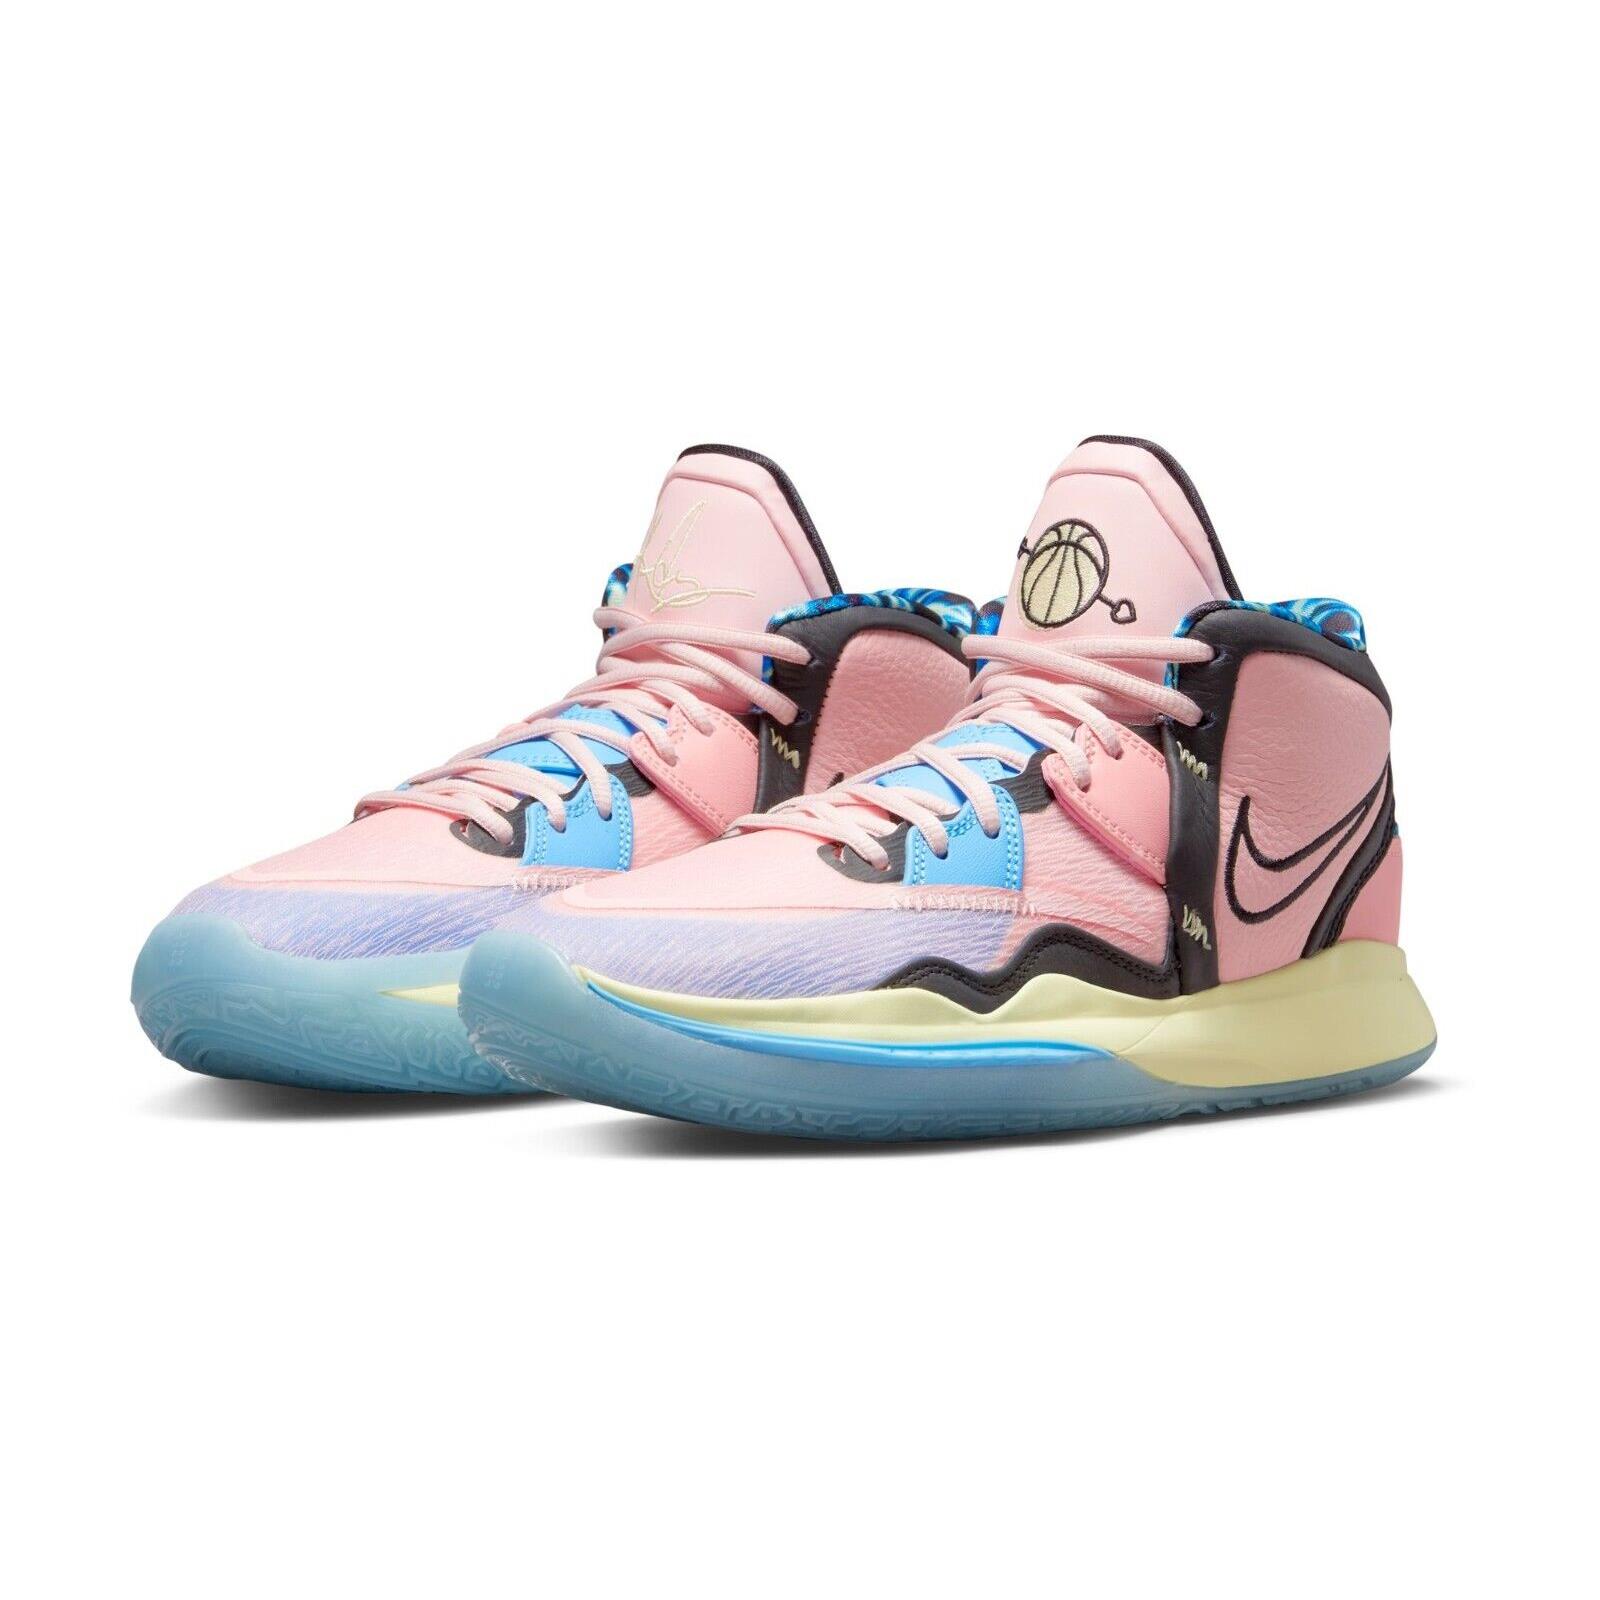 Nike Kyrie Infinity Valentine`s Day Multi Basketball Shoes Men`s Sizes 8-13 - Beige